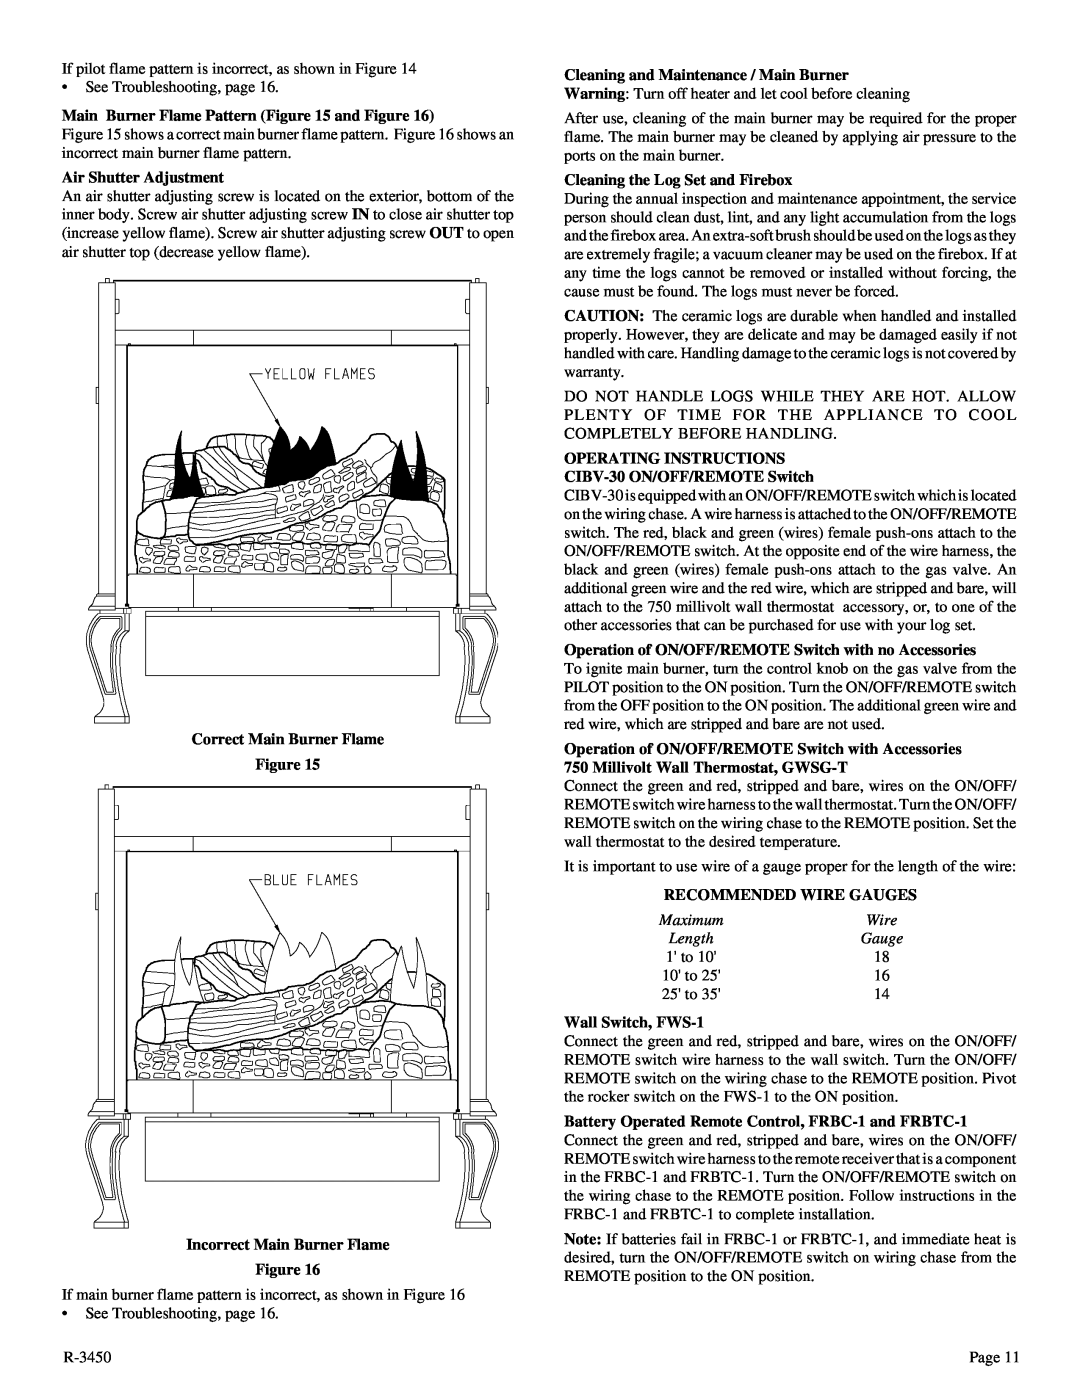 Empire Comfort Systems CIBV-30-2 Main Burner Flame Pattern and Figure, Air Shutter Adjustment, Operating Instructions 